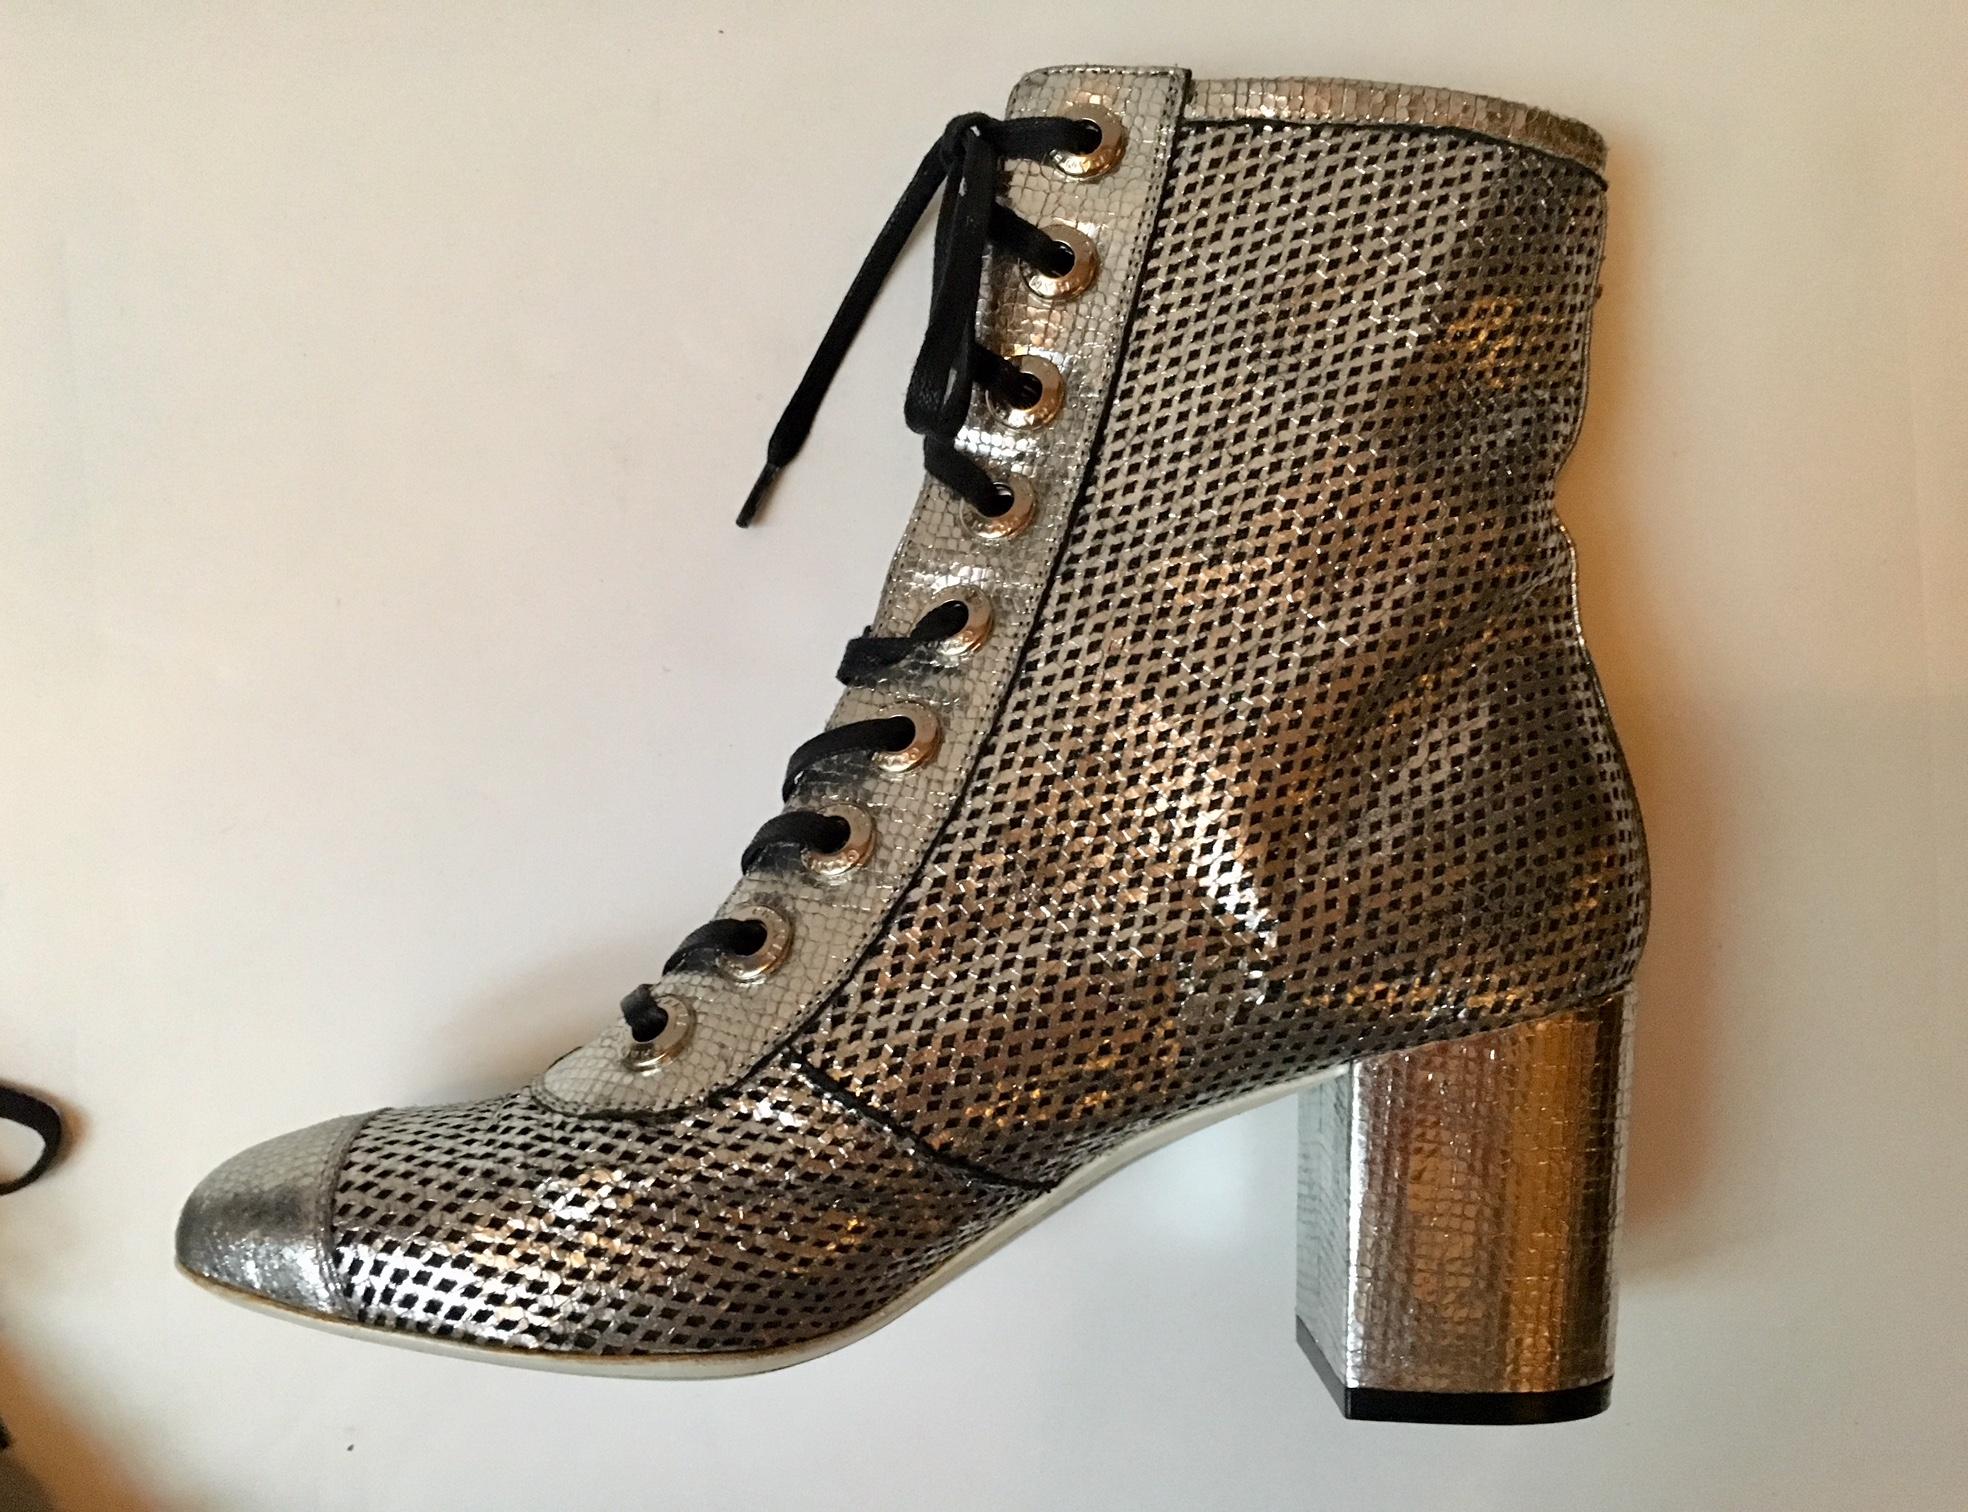 A pair of  Chanel Silver net Leather laced  Boots .Made of pierced leather in metallic white  gold leather.
- laser cut leather 
- rounded cap-toes
- chunky heel
- black cord lace-up ties 
worn only for the 2008 spring summer show .
bearing the